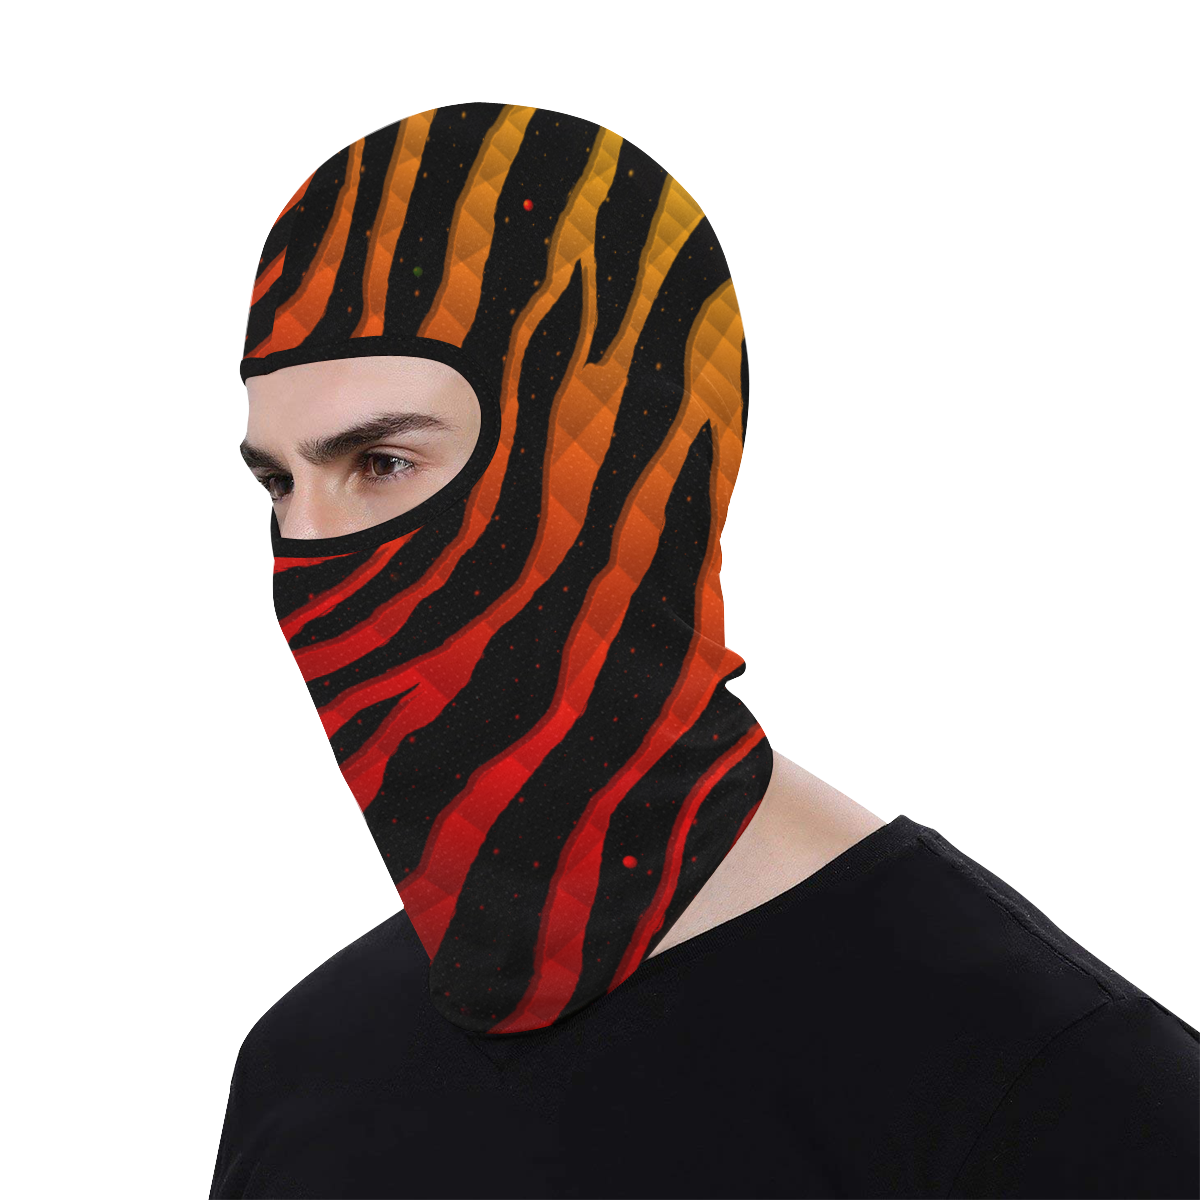 Ripped SpaceTime Stripes - Black/Red/Gold All Over Print Balaclava